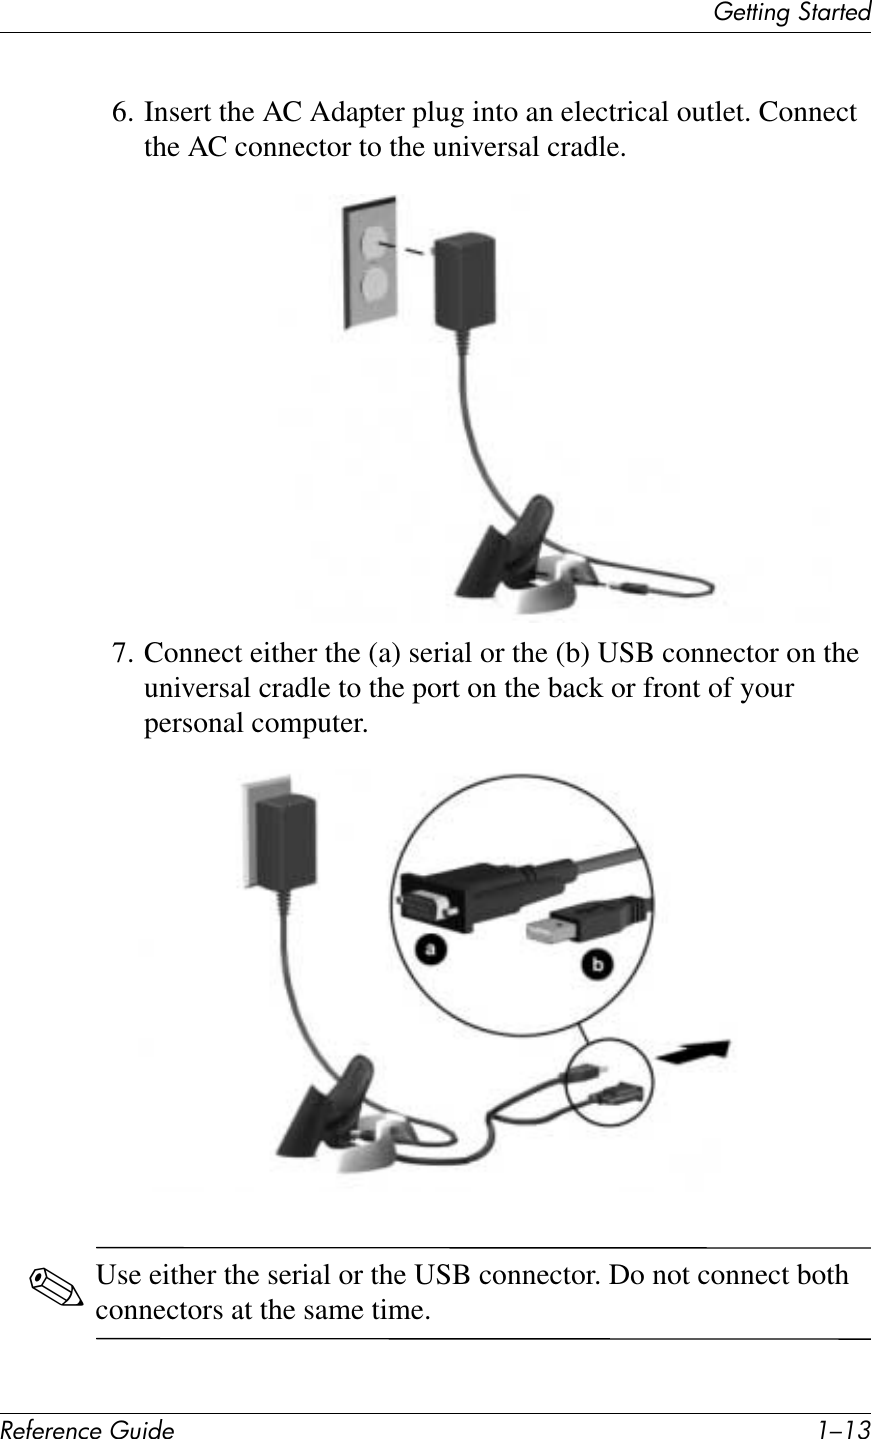 (&quot;11*%2&apos;314$1&quot;+!&quot;#&quot;$&quot;%&amp;&quot;&apos;()*+&quot; ./.96. Insert the AC Adapter plug into an electrical outlet. Connect the AC connector to the universal cradle.7. Connect either the (a) serial or the (b) USB connector on the universal cradle to the port on the back or front of your personal computer.✎Use either the serial or the USB connector. Do not connect both connectors at the same time.